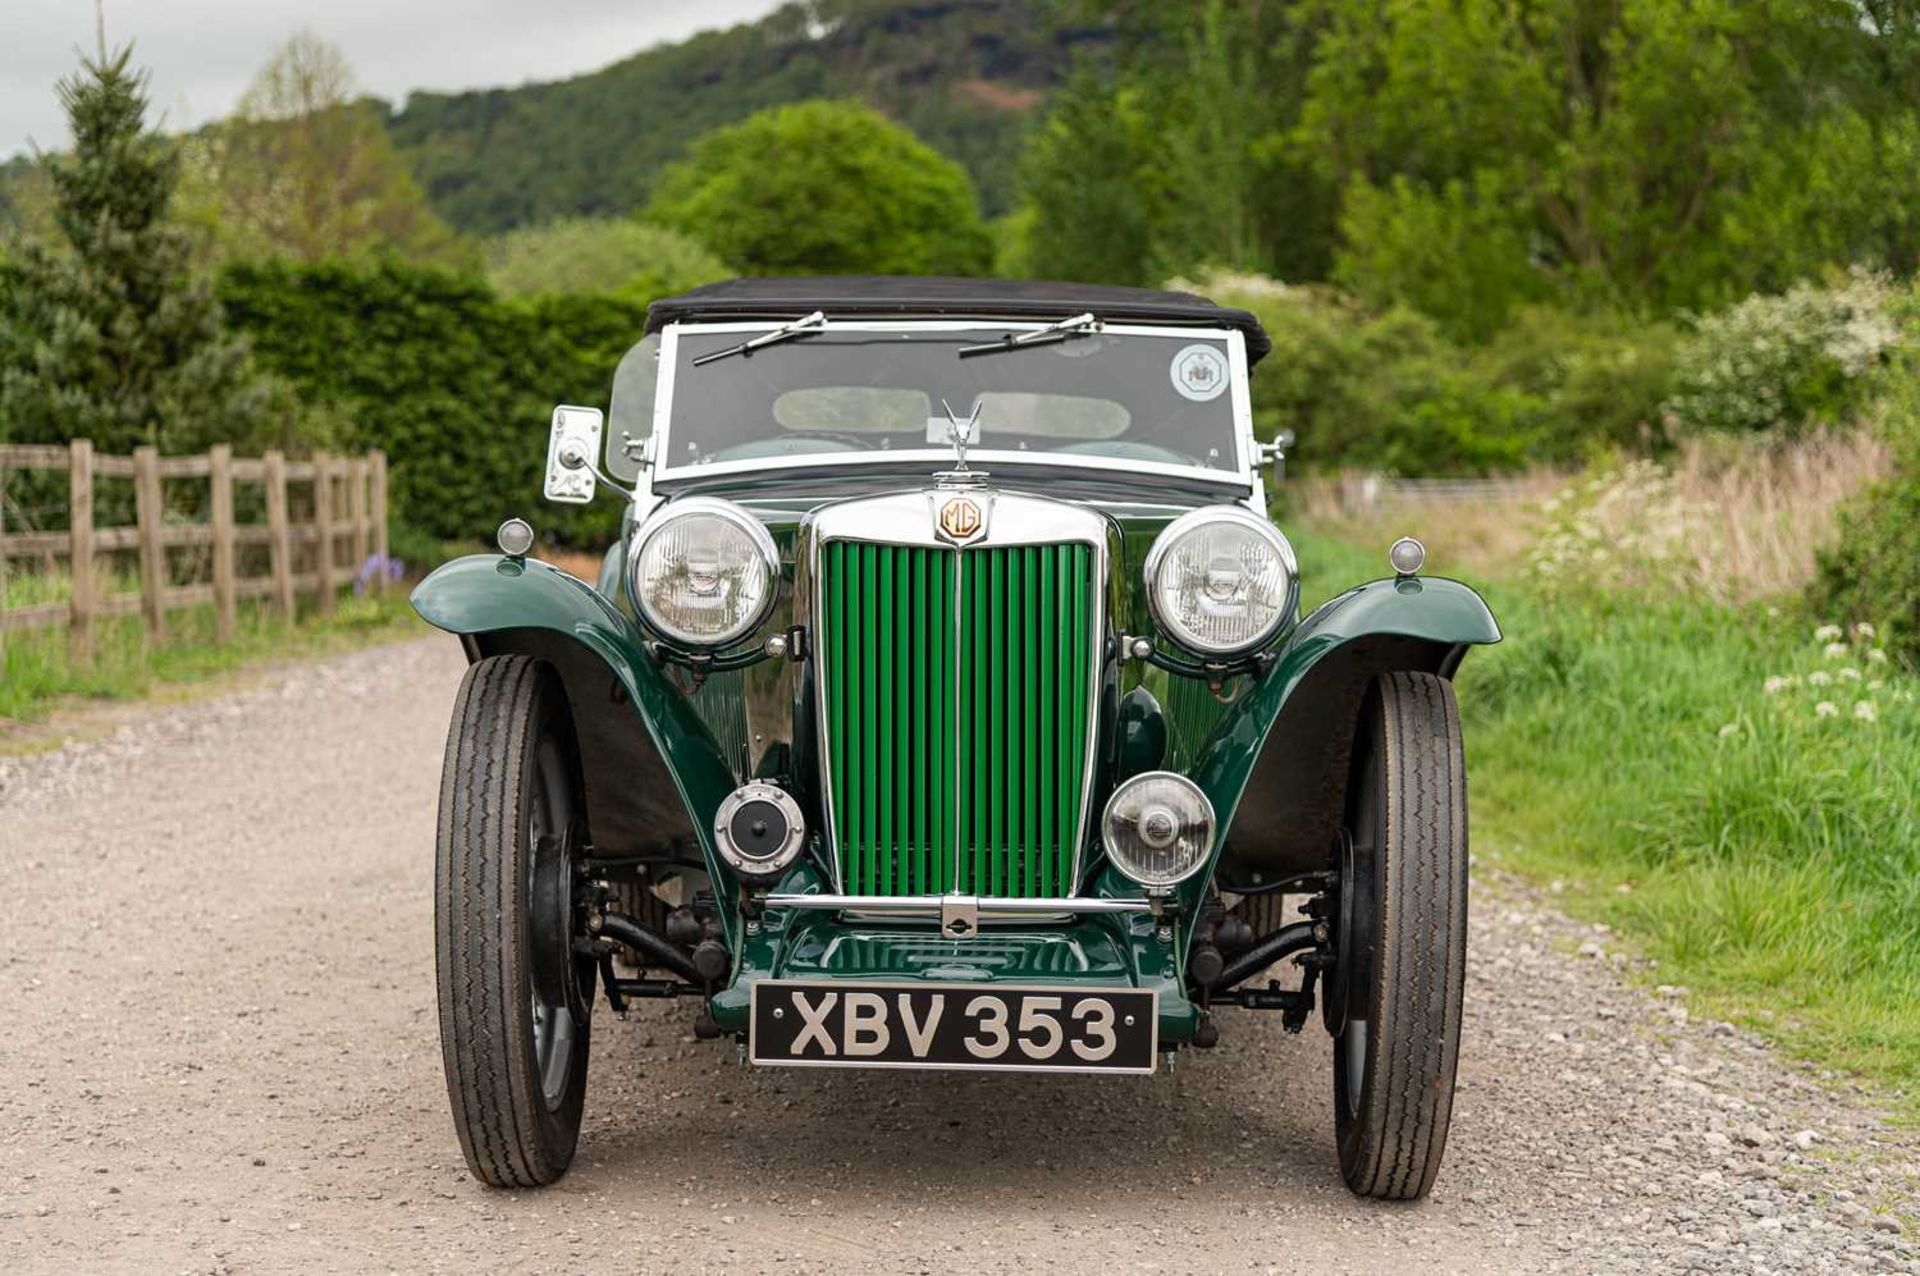 1947 MG TC Midget  Fully restored, right-hand-drive UK home market example - Image 3 of 76